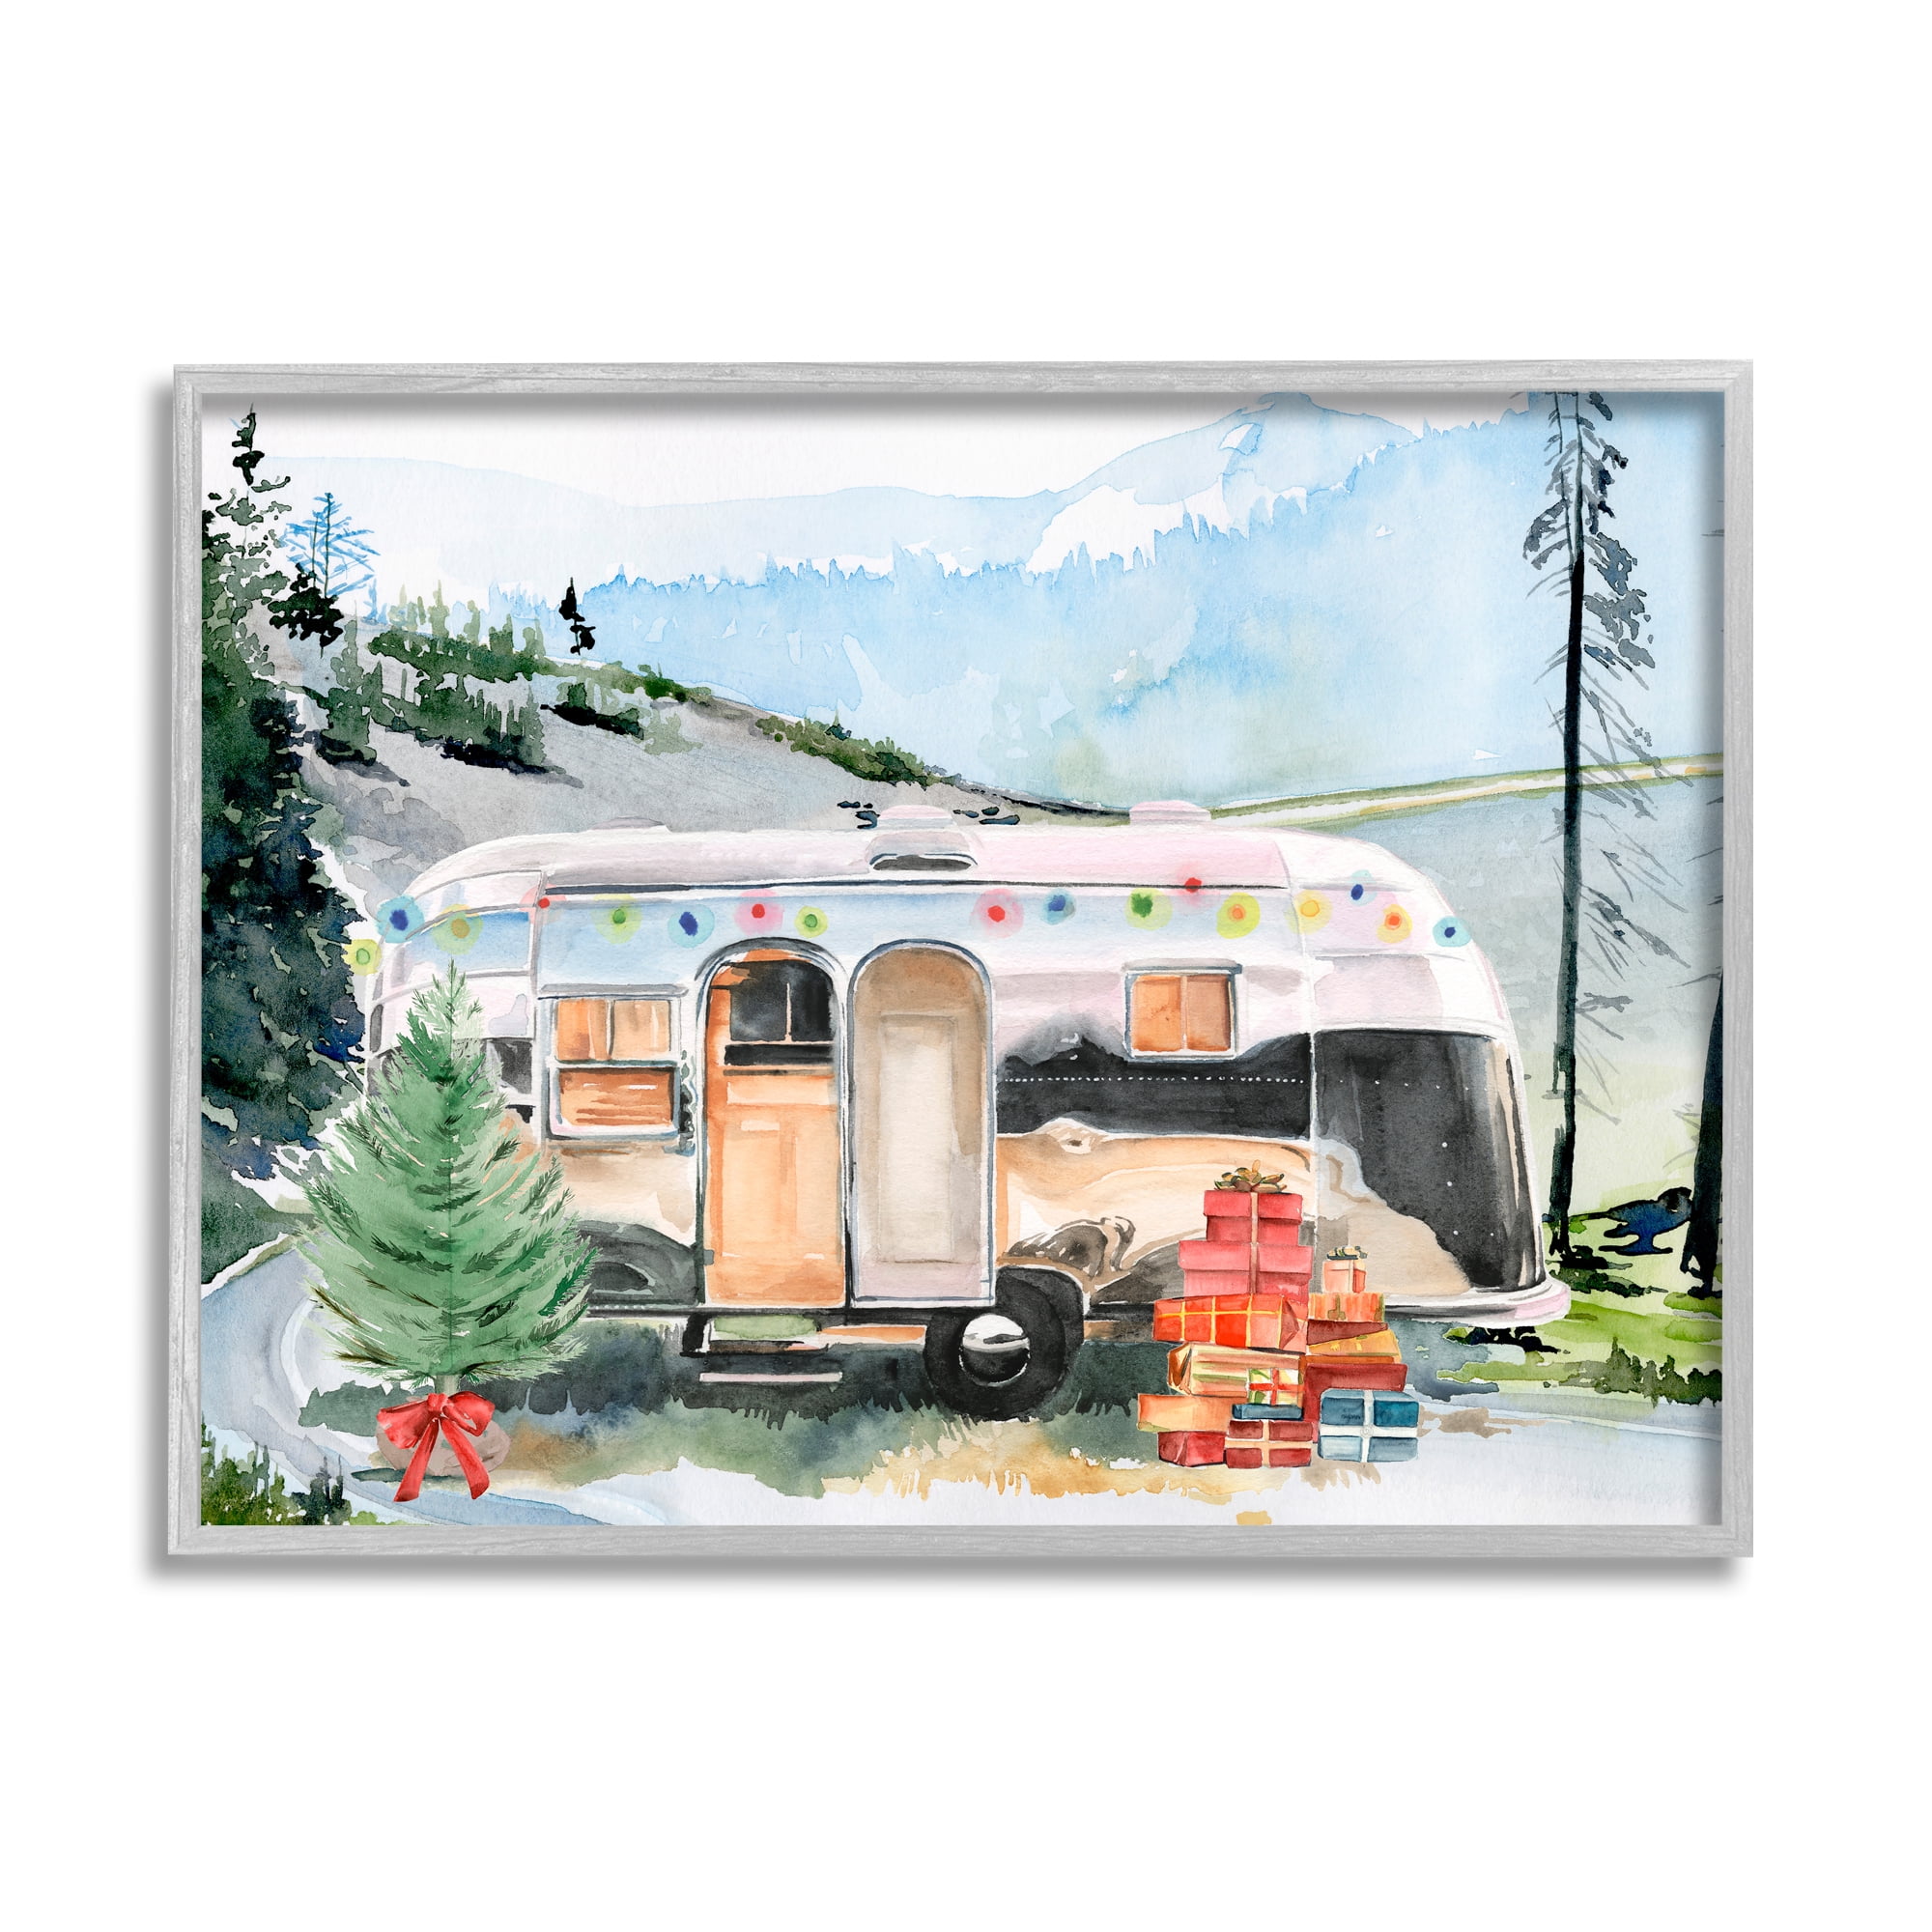 RETRO CAMPER TRAILER CHRISTMAS ORNAMENT WOODEN RUSTIC MODERN FARMHOUSE Details about   NEW 